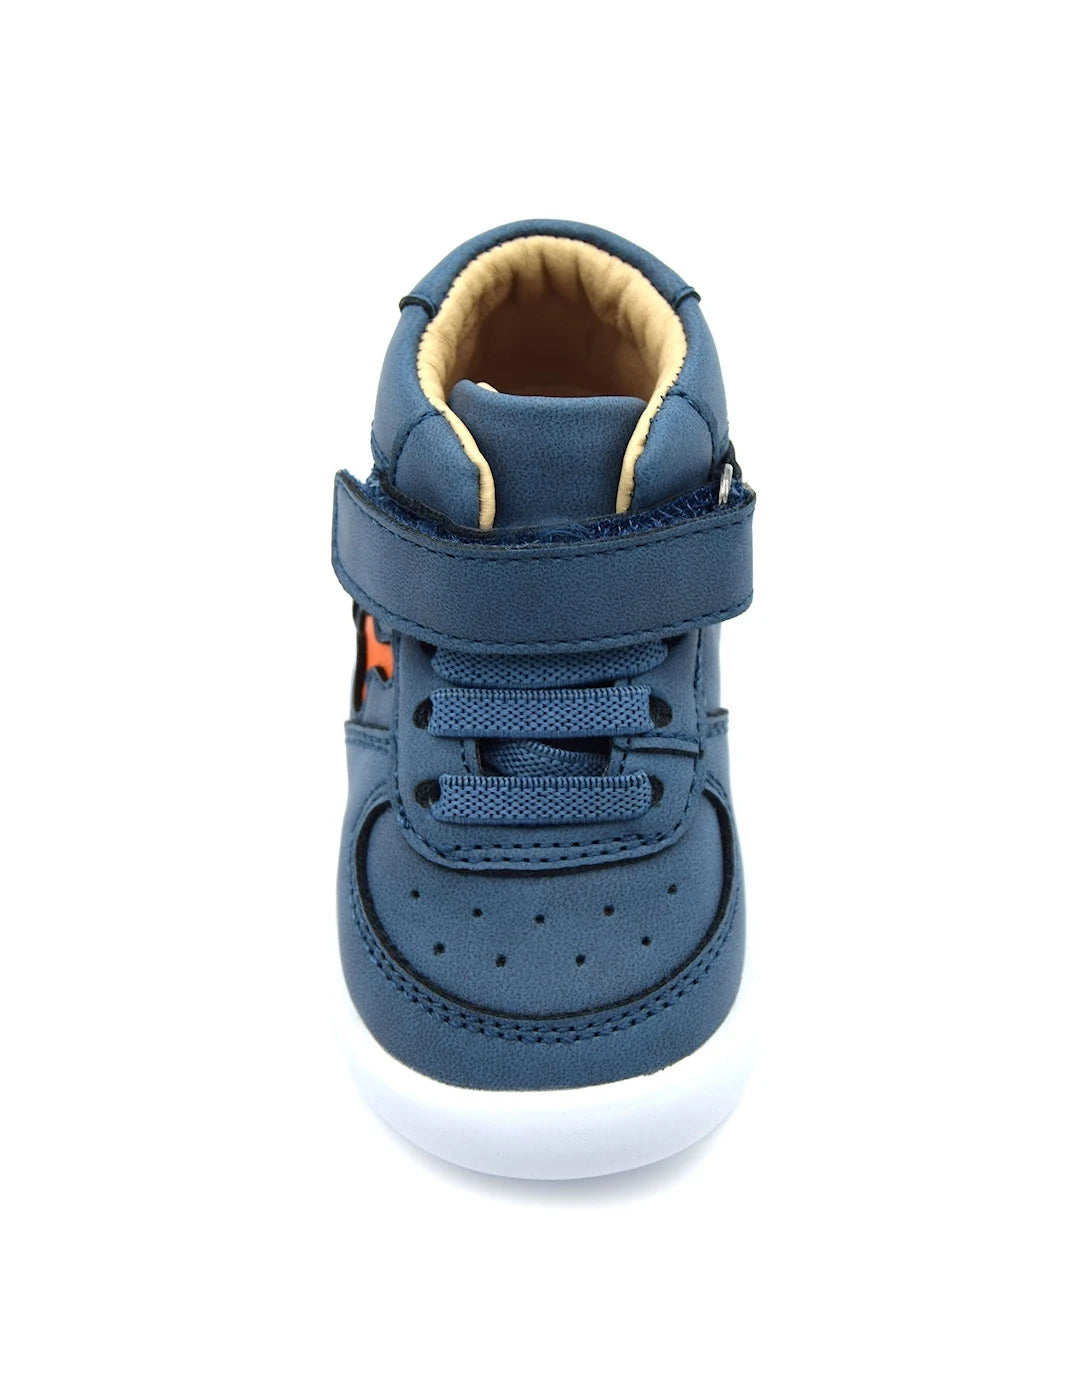 A boys mid-top shoe by Shoesme, style BF24SO14-B, in blue with orange motif on side. single velcro fastening and bungee lace. Top view.